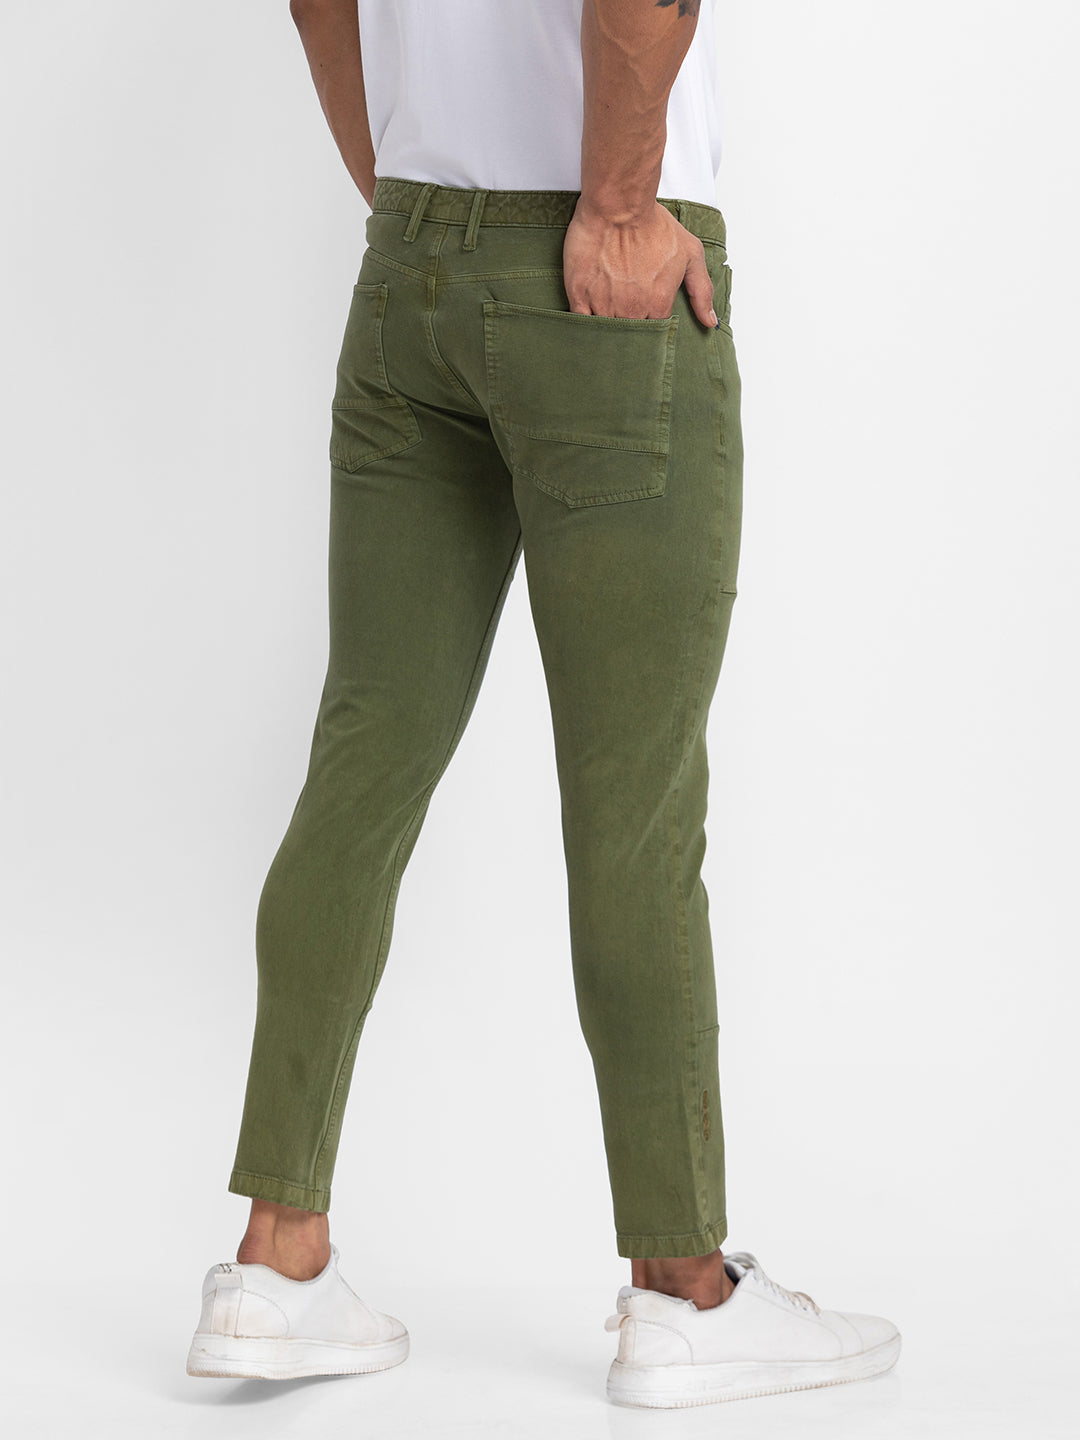 Spykar Olive Green Cotton Slim Fit Tapered Length Trousers For Men